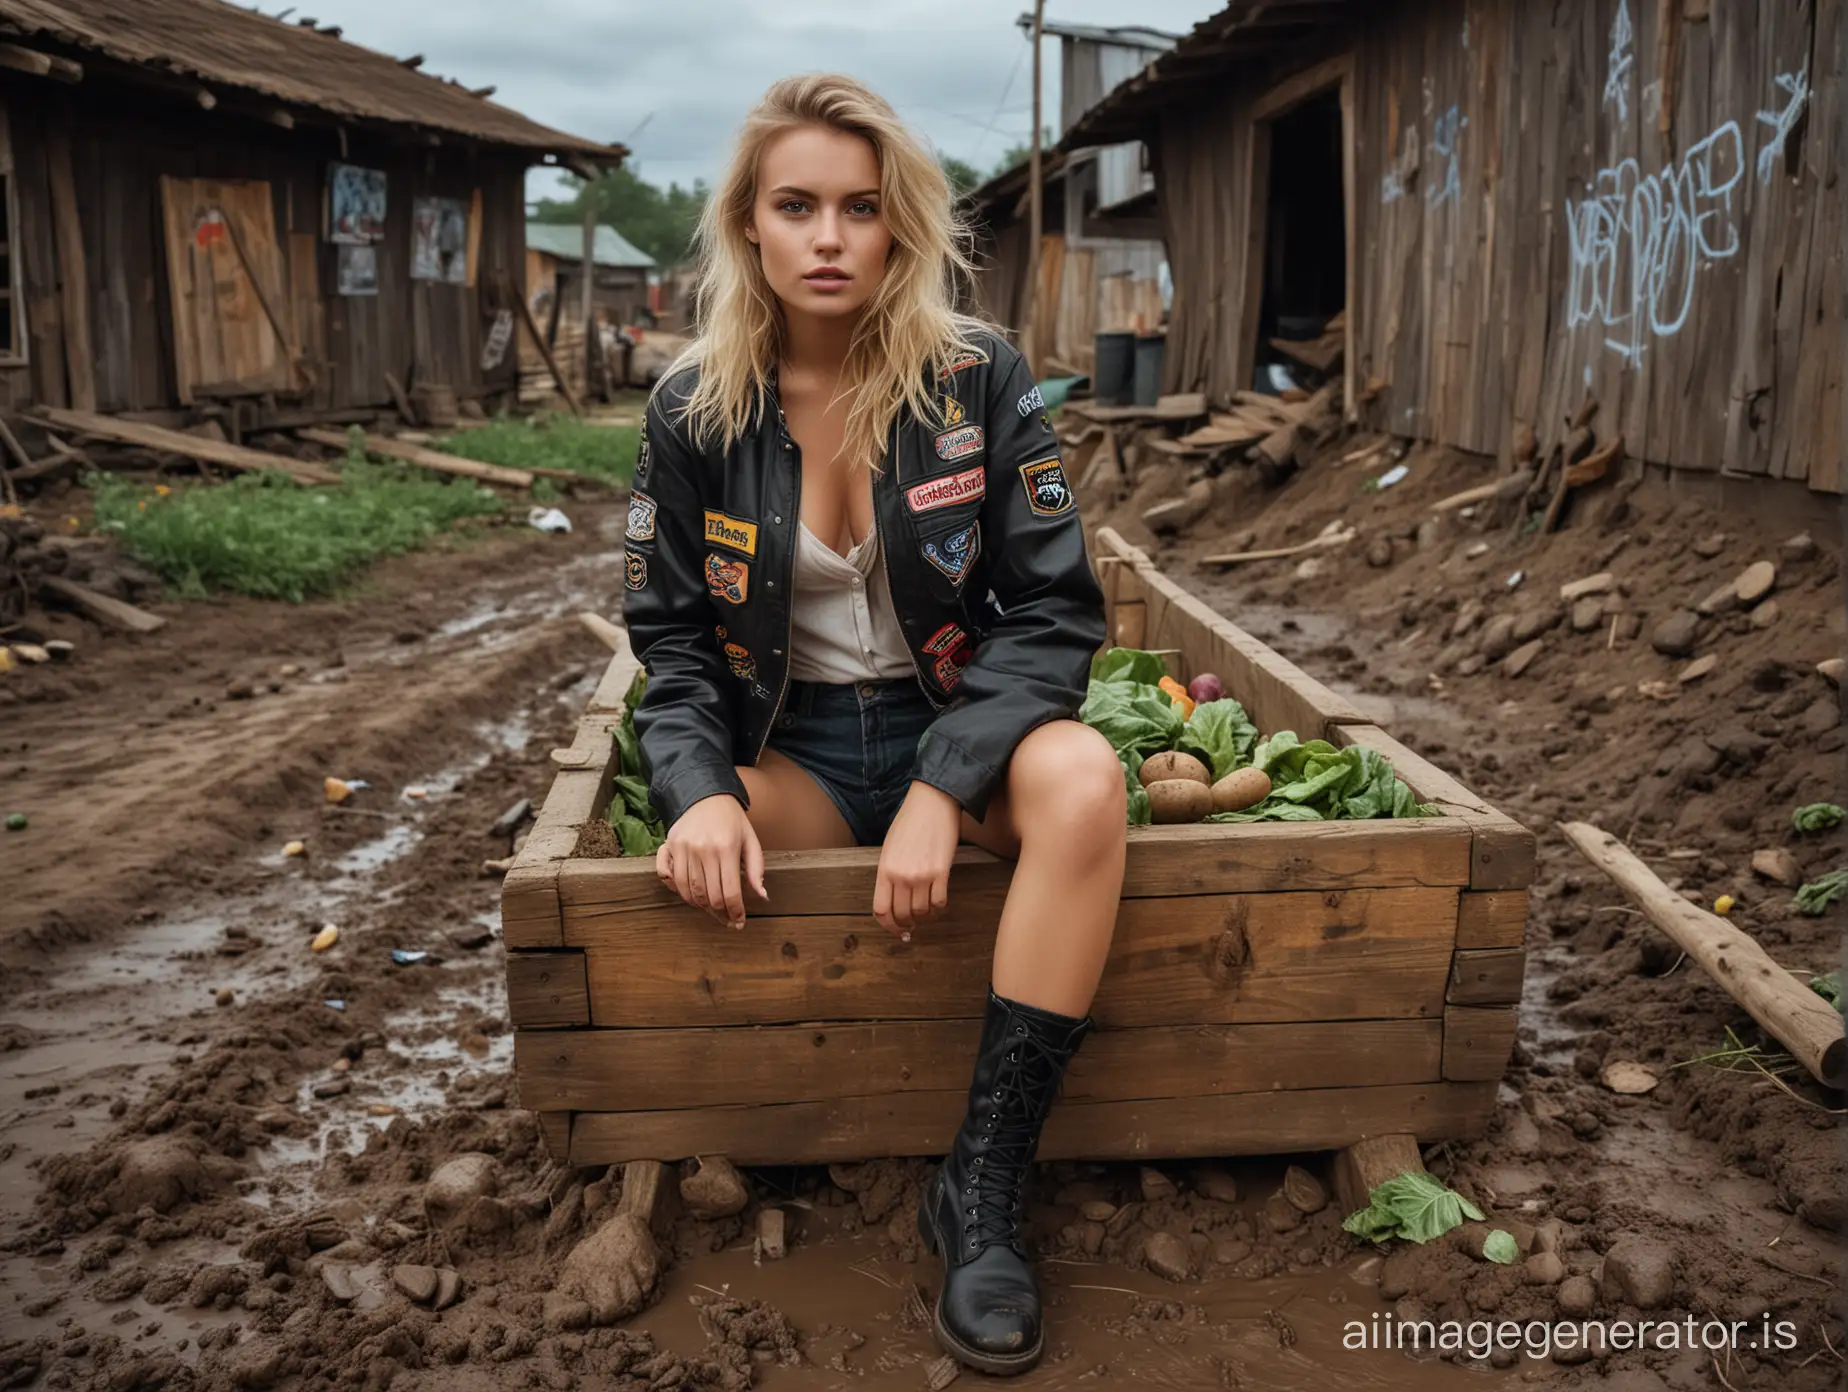 wide angle, blonde-haired young european woman with a wild and untamed look, dressed in attire reminiscent of a rebellious surfer, Her clothing is adorned with patches and graffiti-like designs. high suede black boots with thick heels. She exudes confidence and charisma, with a mischievous glint in her eye. stirs food from potatoes and cabbage for animals in a wooden trough. in the mud in an old Russian village. night. more detail